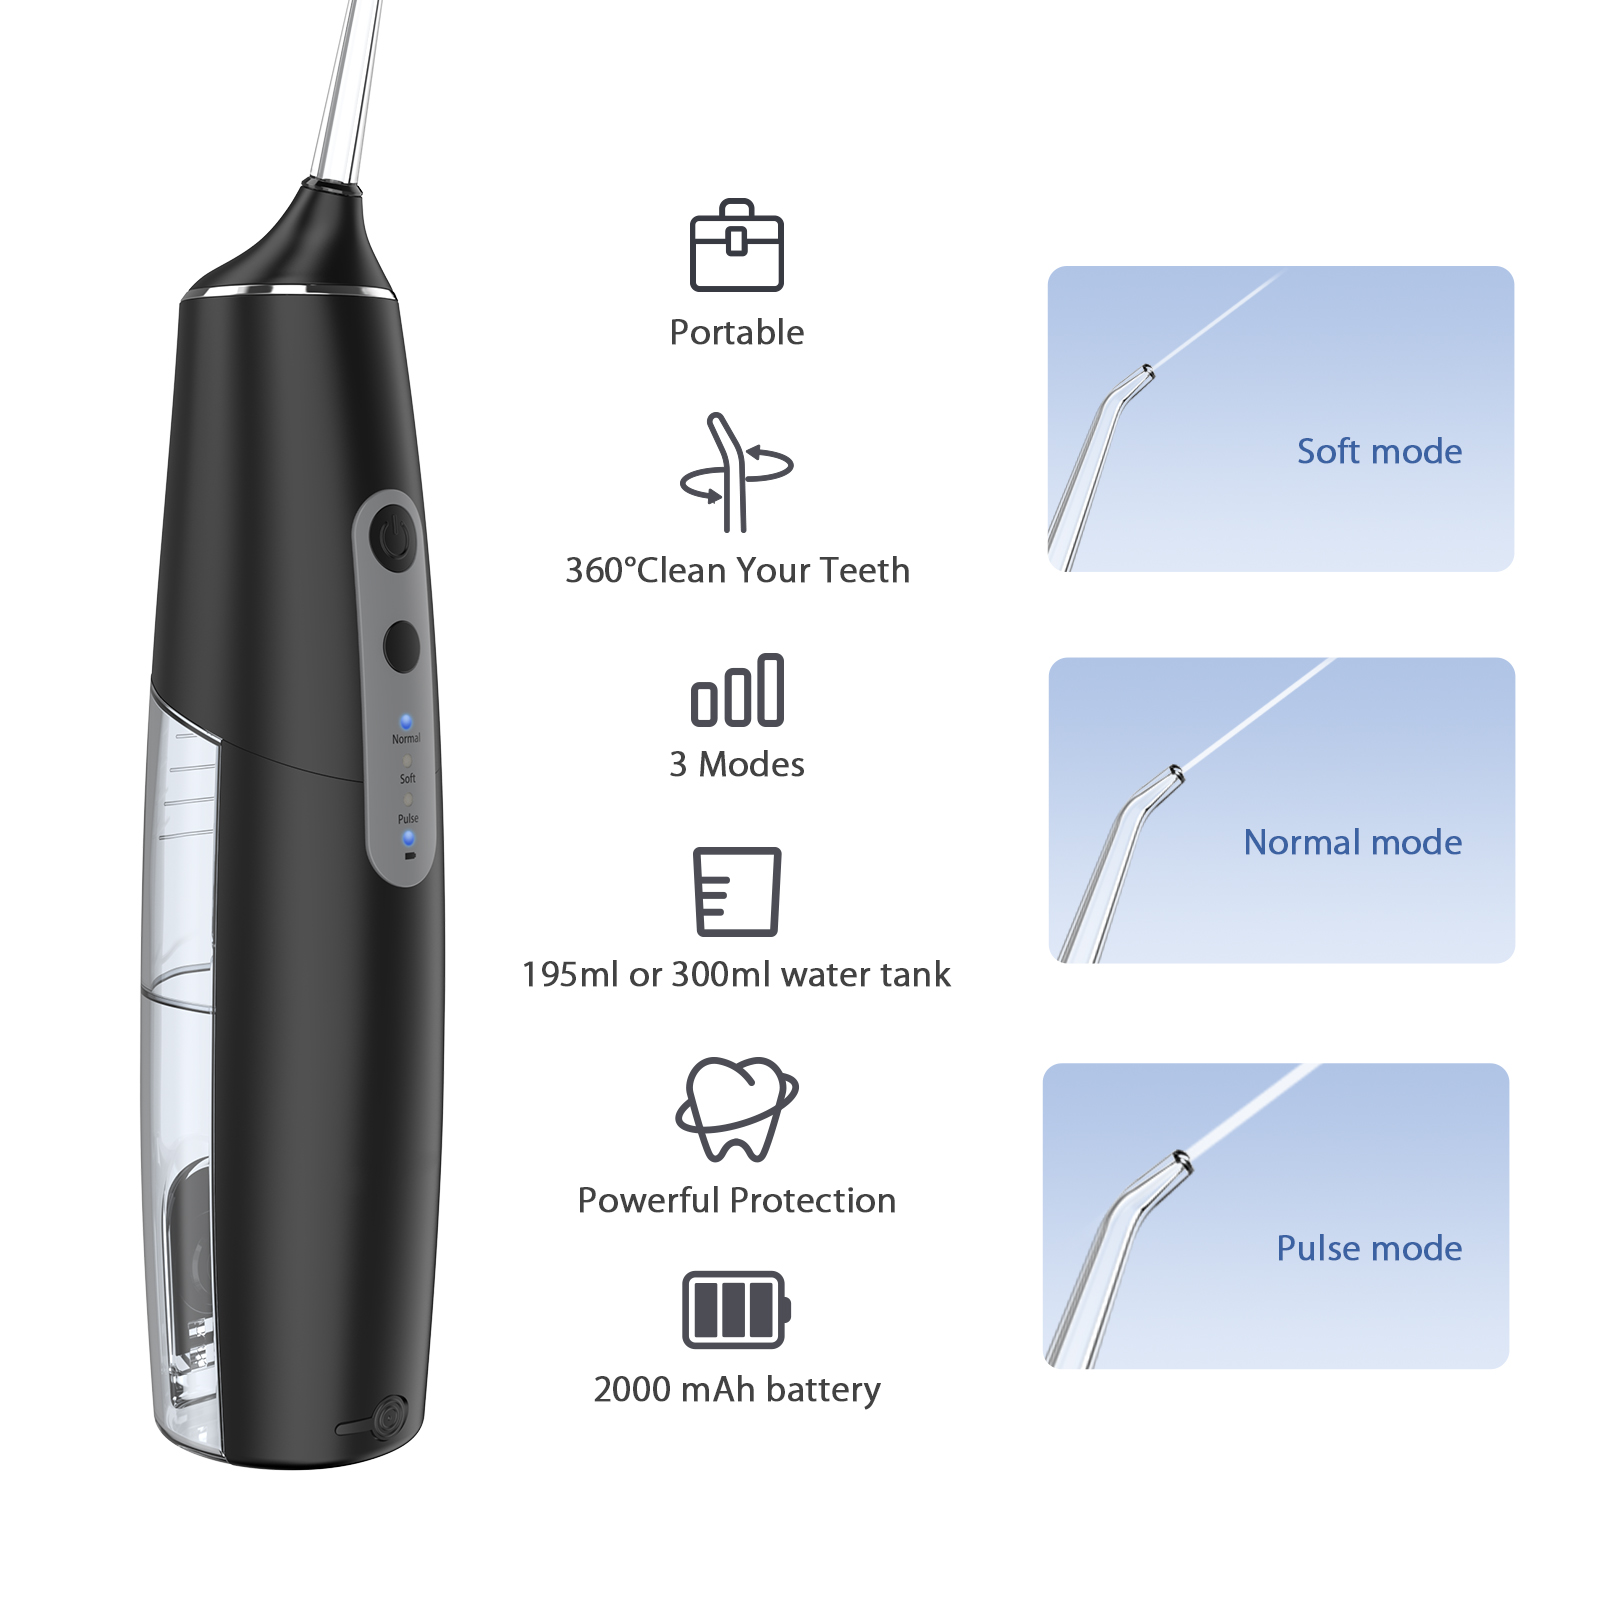 Intelligent Water Flosser with 4 cleaning modes